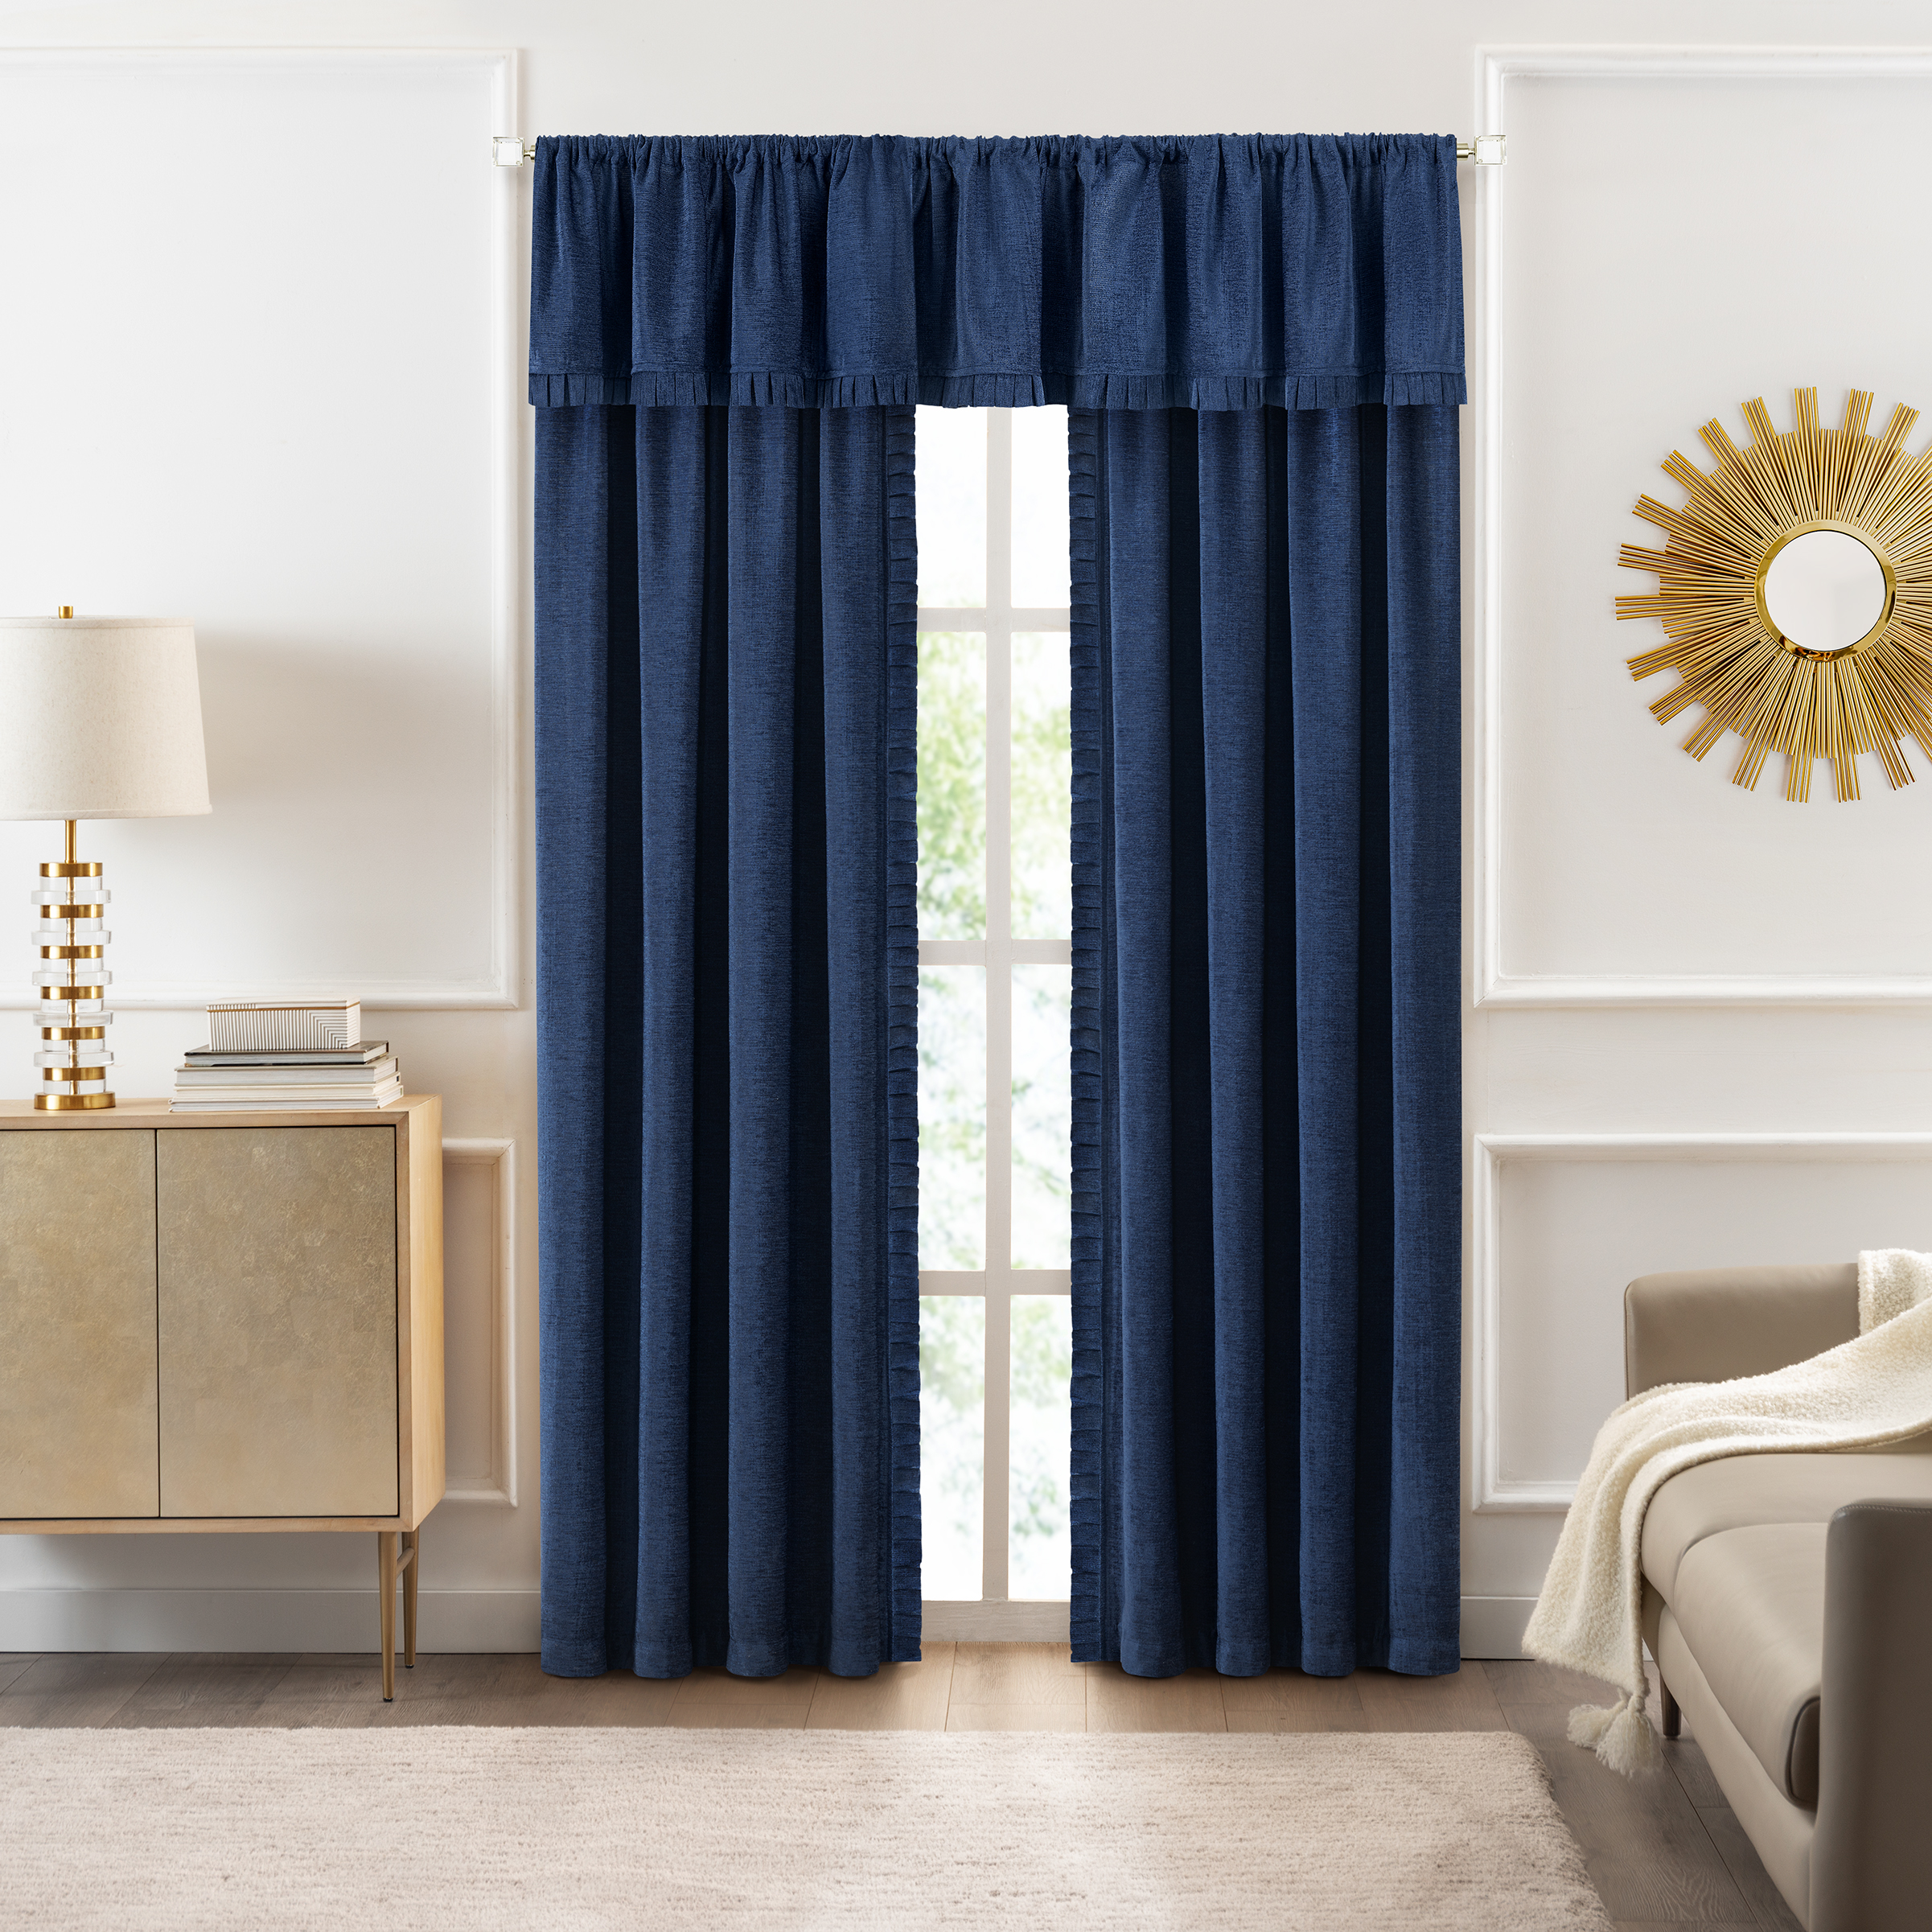 Achim Bordeaux Indoor Polyester Light Filtering Solid Curtain Panel, Navy, 52-in W x 63-in L - image 3 of 7